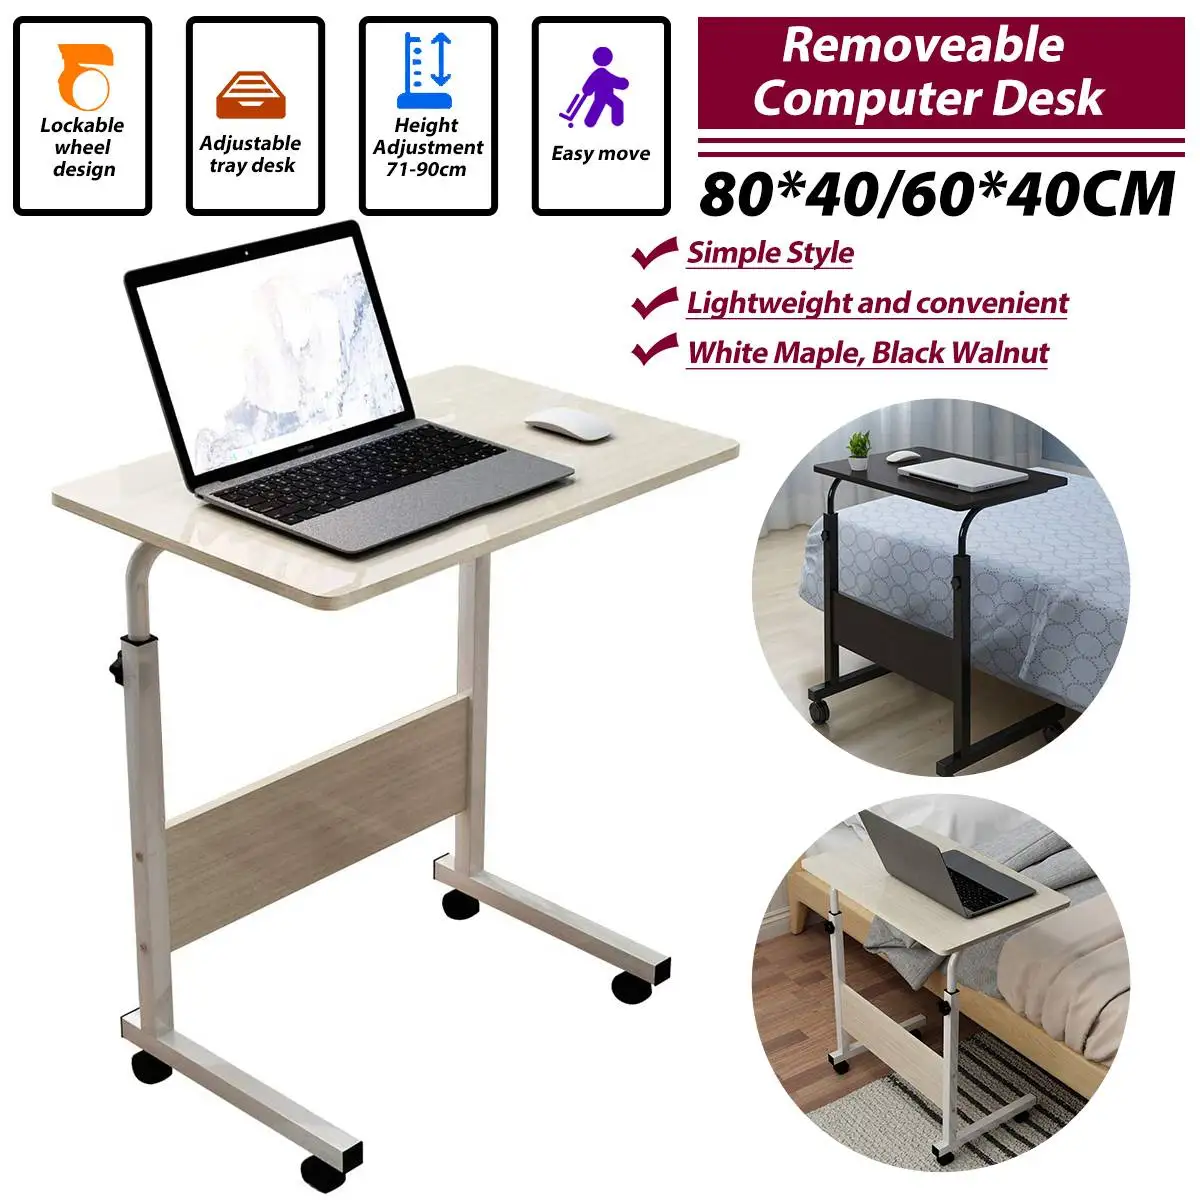 

80x40CM 60x40CM Foldable Computer Table Adjustable Portable Laptop Desk Rotate Laptop Bed Table Can be Lifted Standing Desk